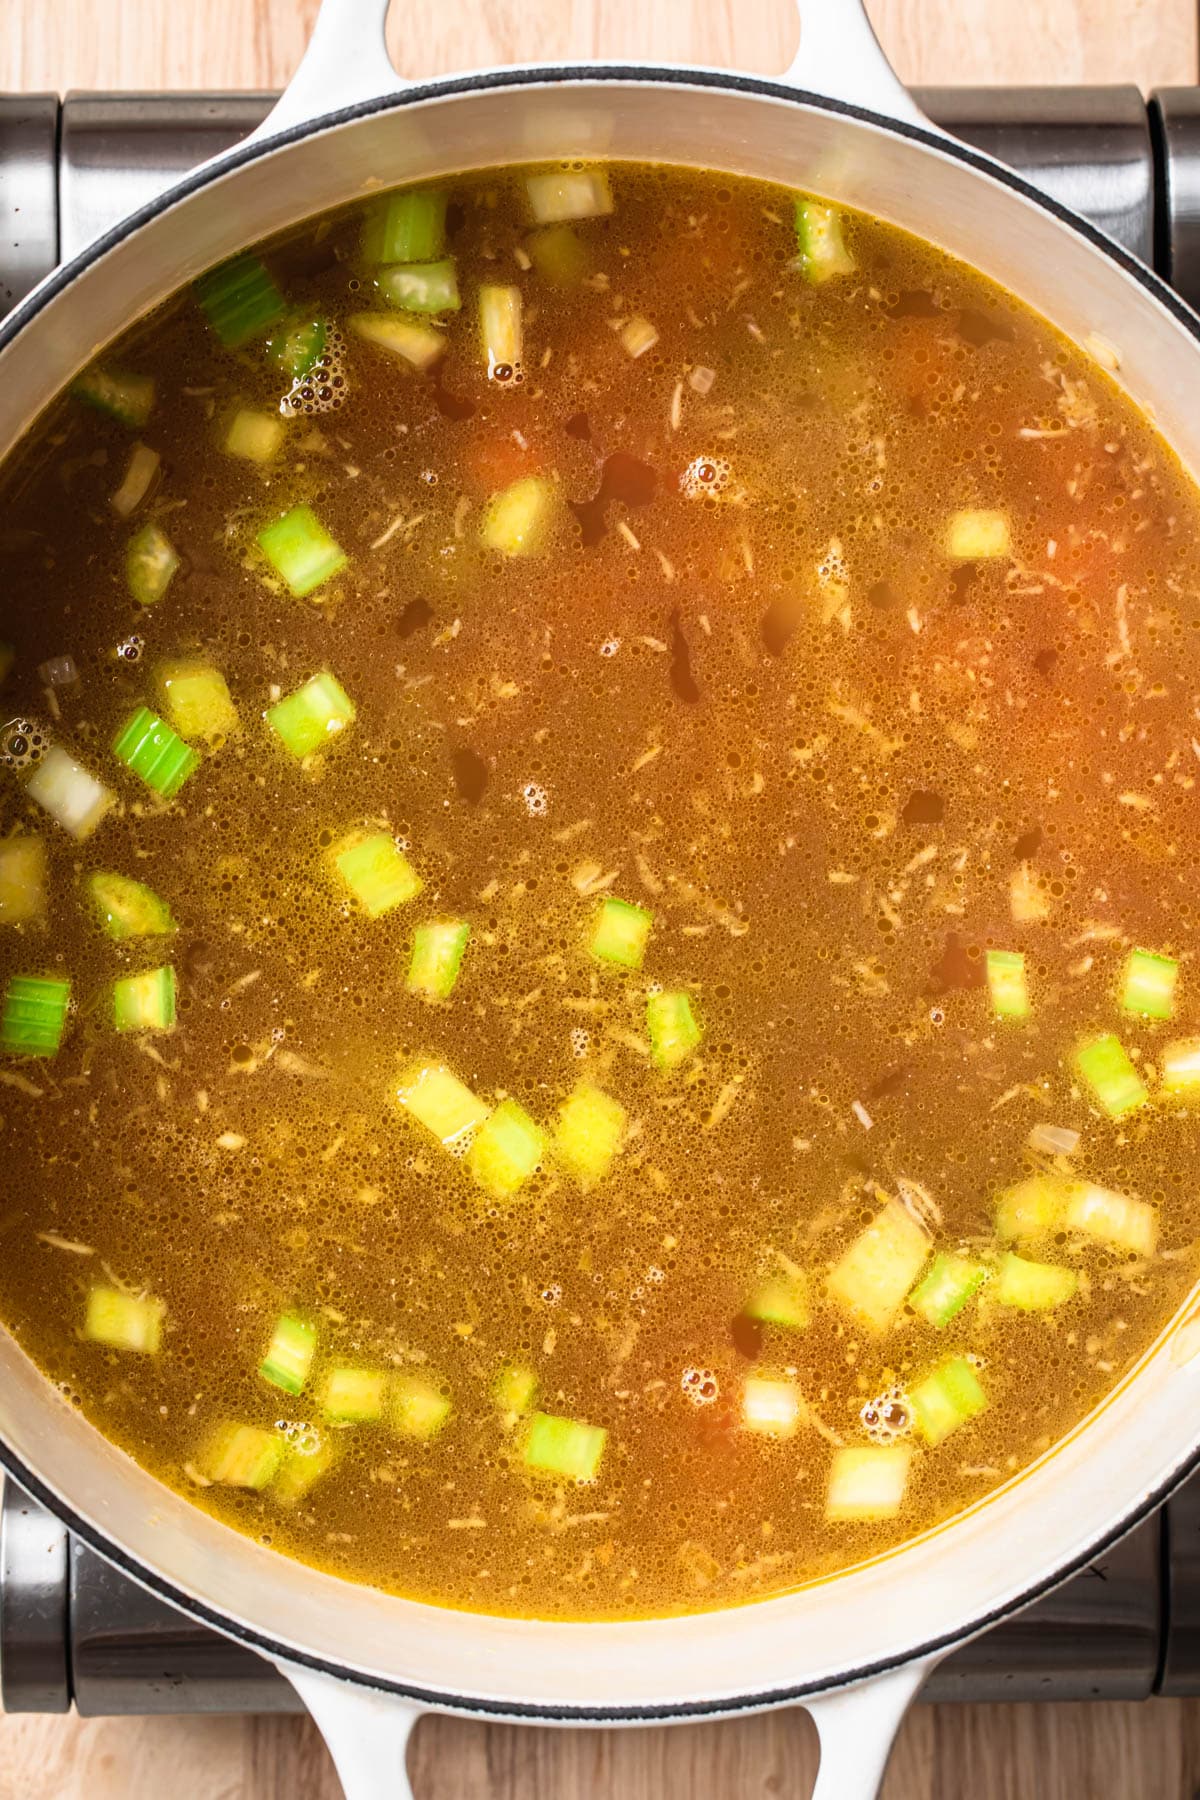 Broth added to a large pot with vegetables.